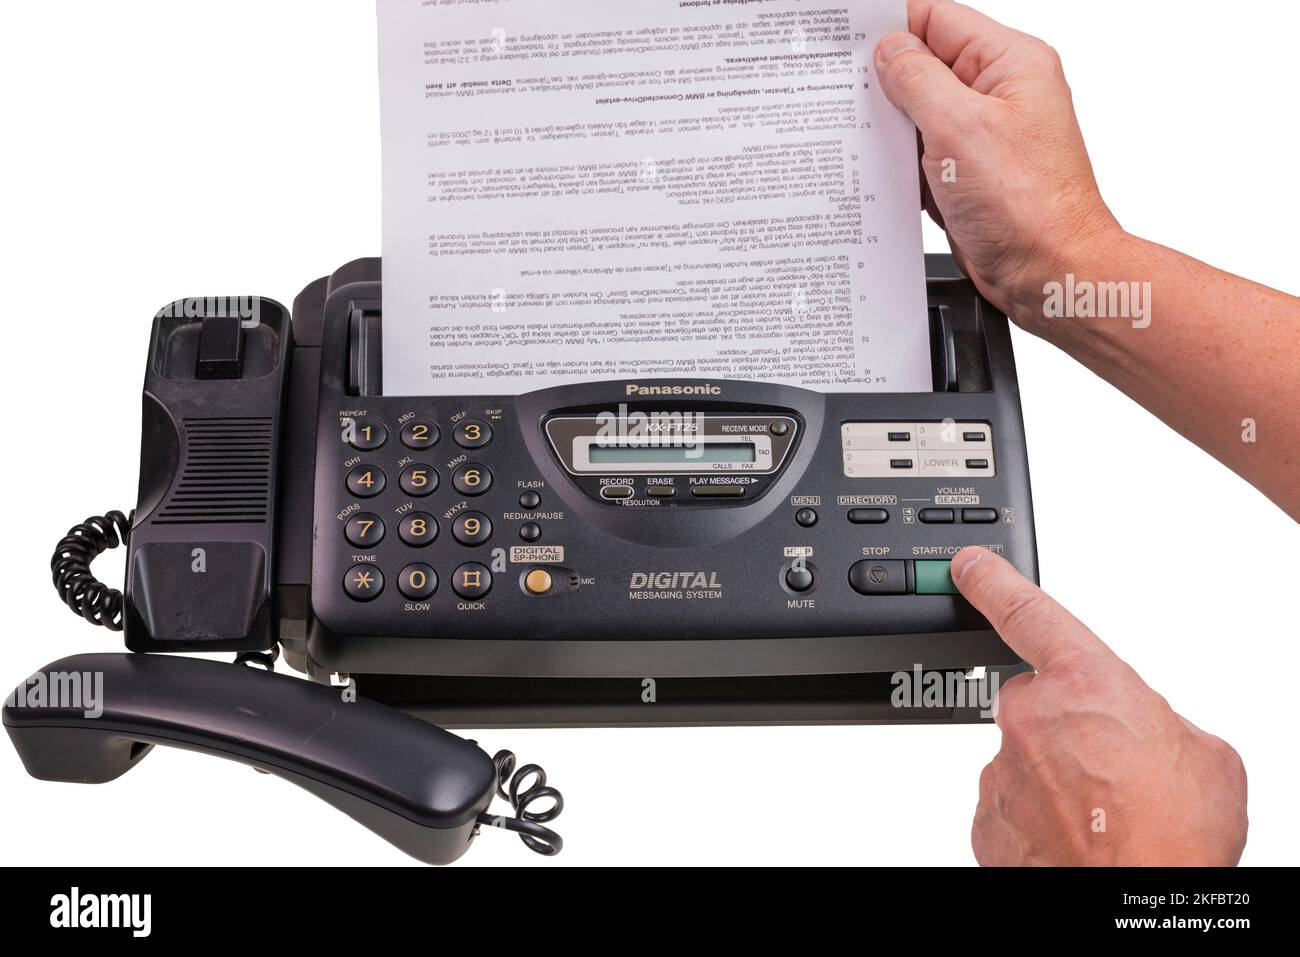 Close up view of person's hands sending fax on Panasonic fax phone. Sweden. Stock Photo